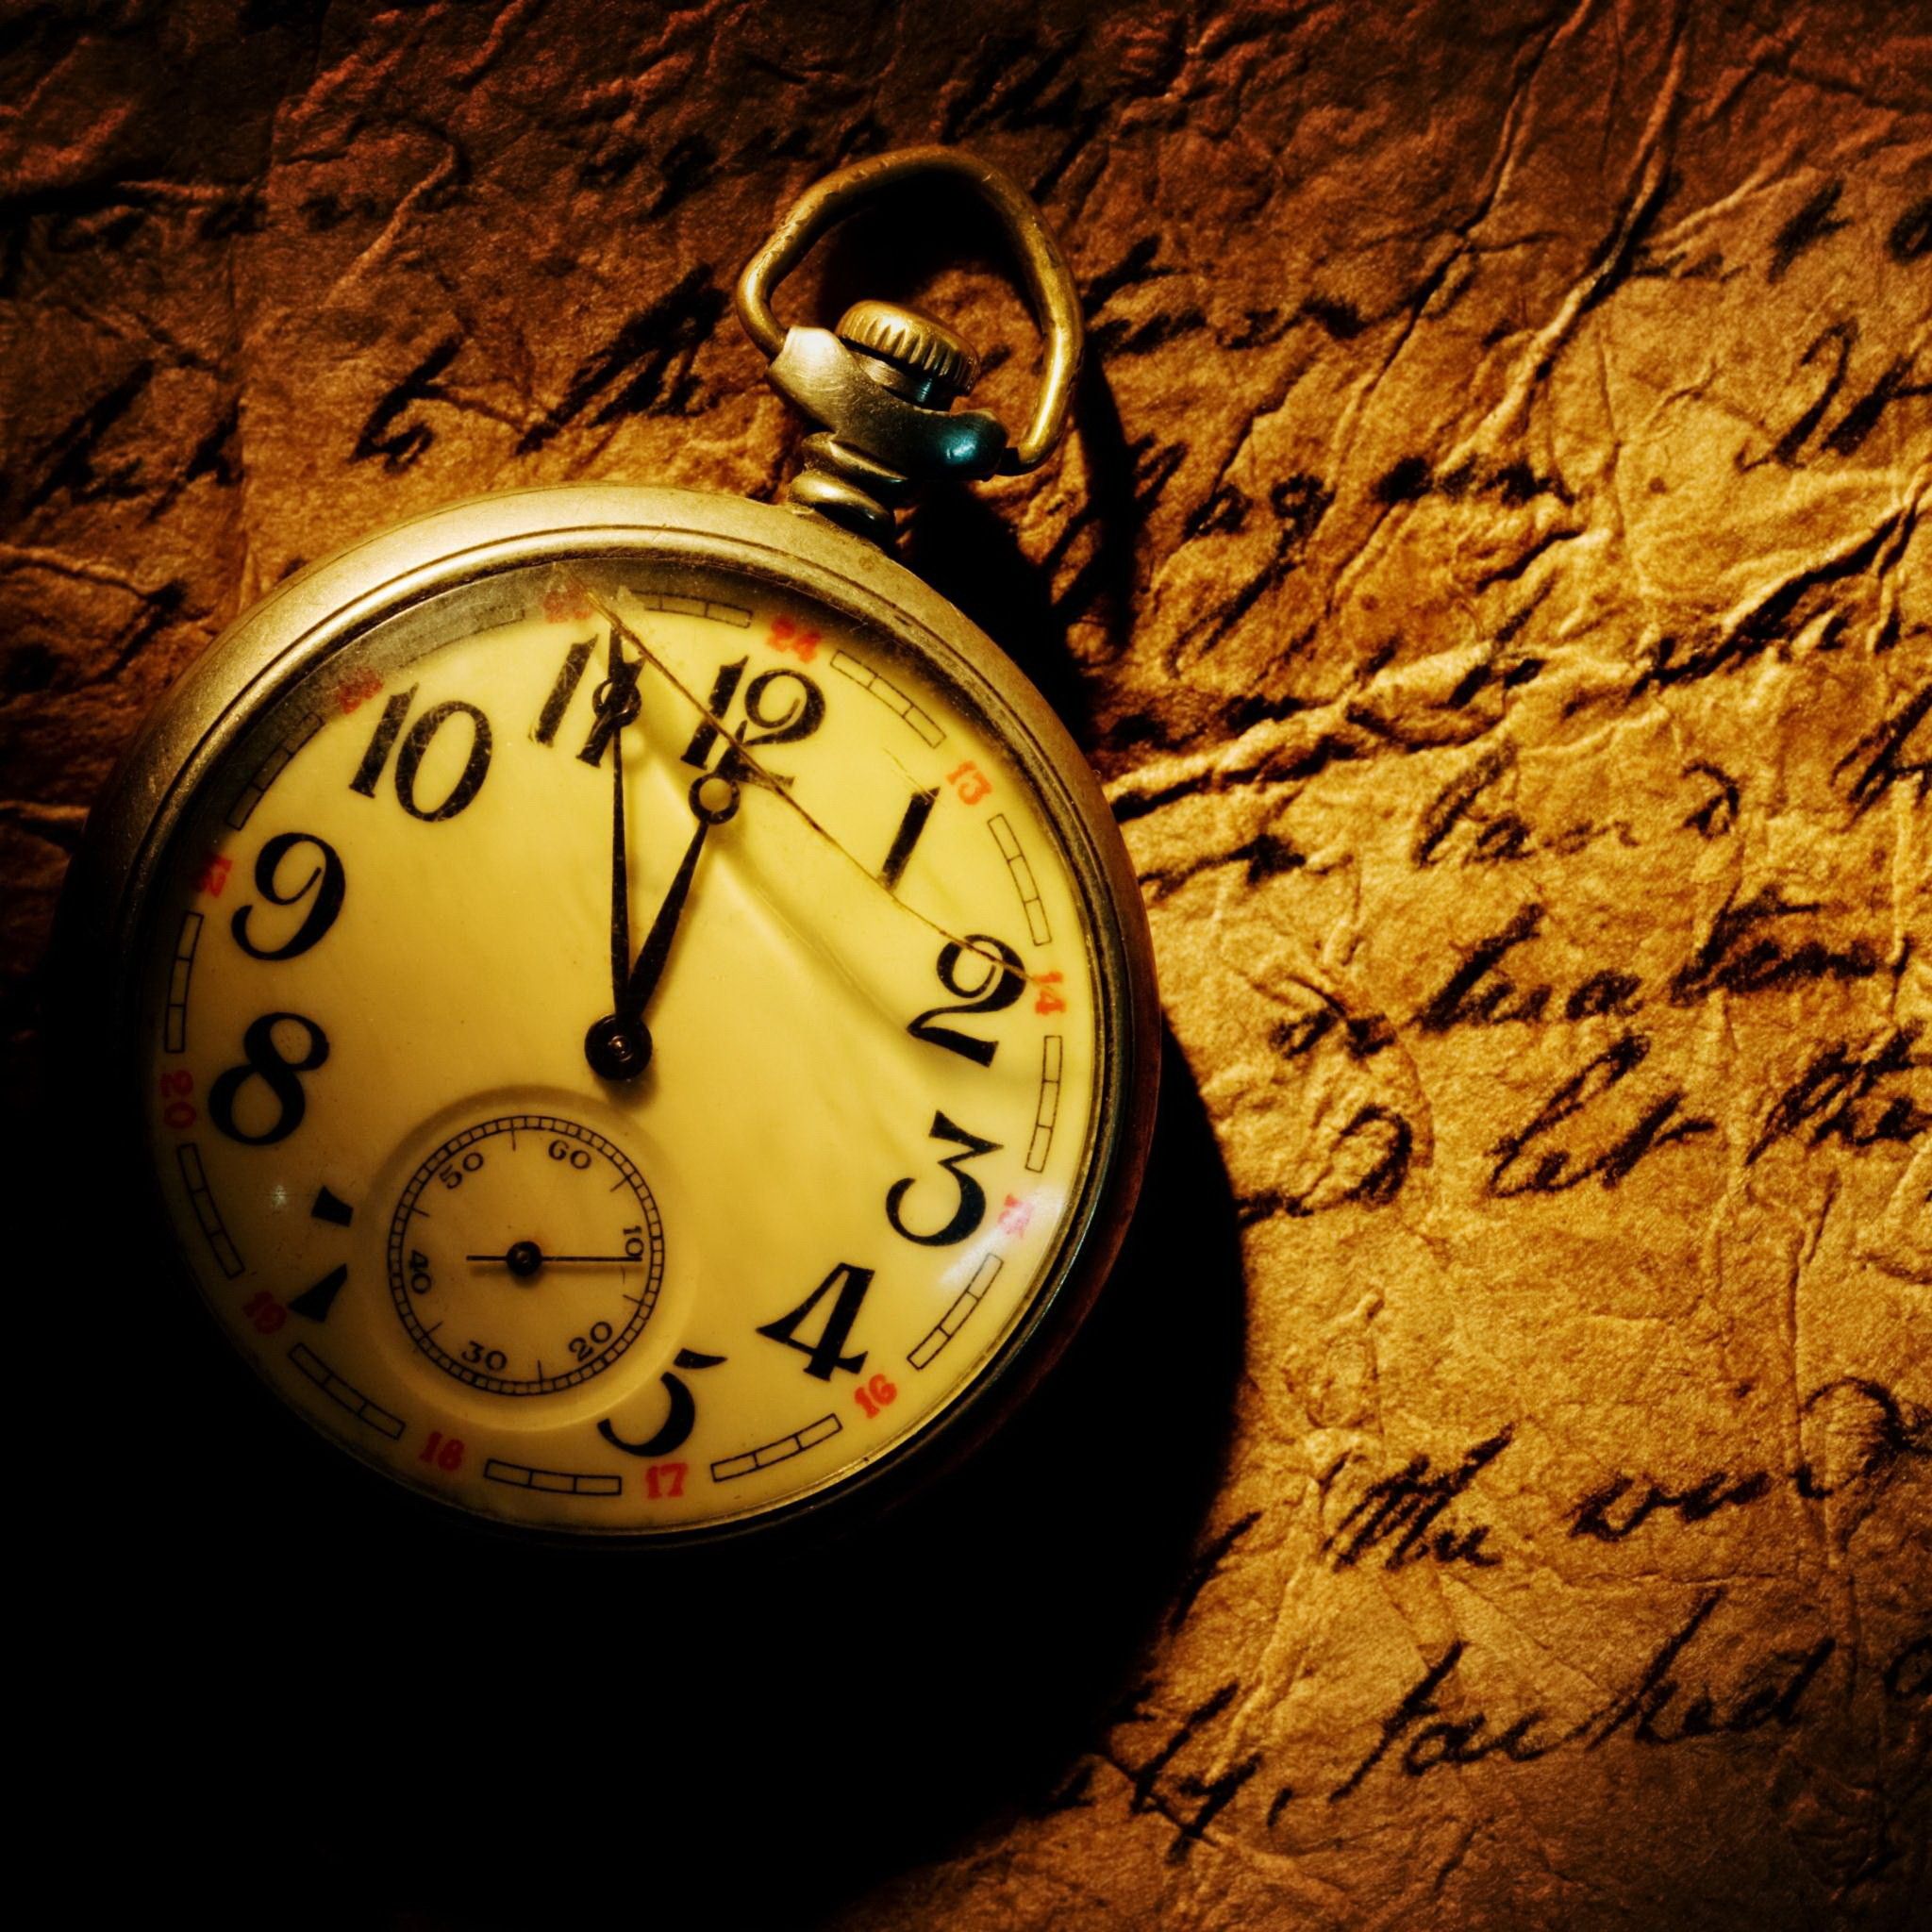 Vintage Old Fashioned Clock - HD Wallpaper 